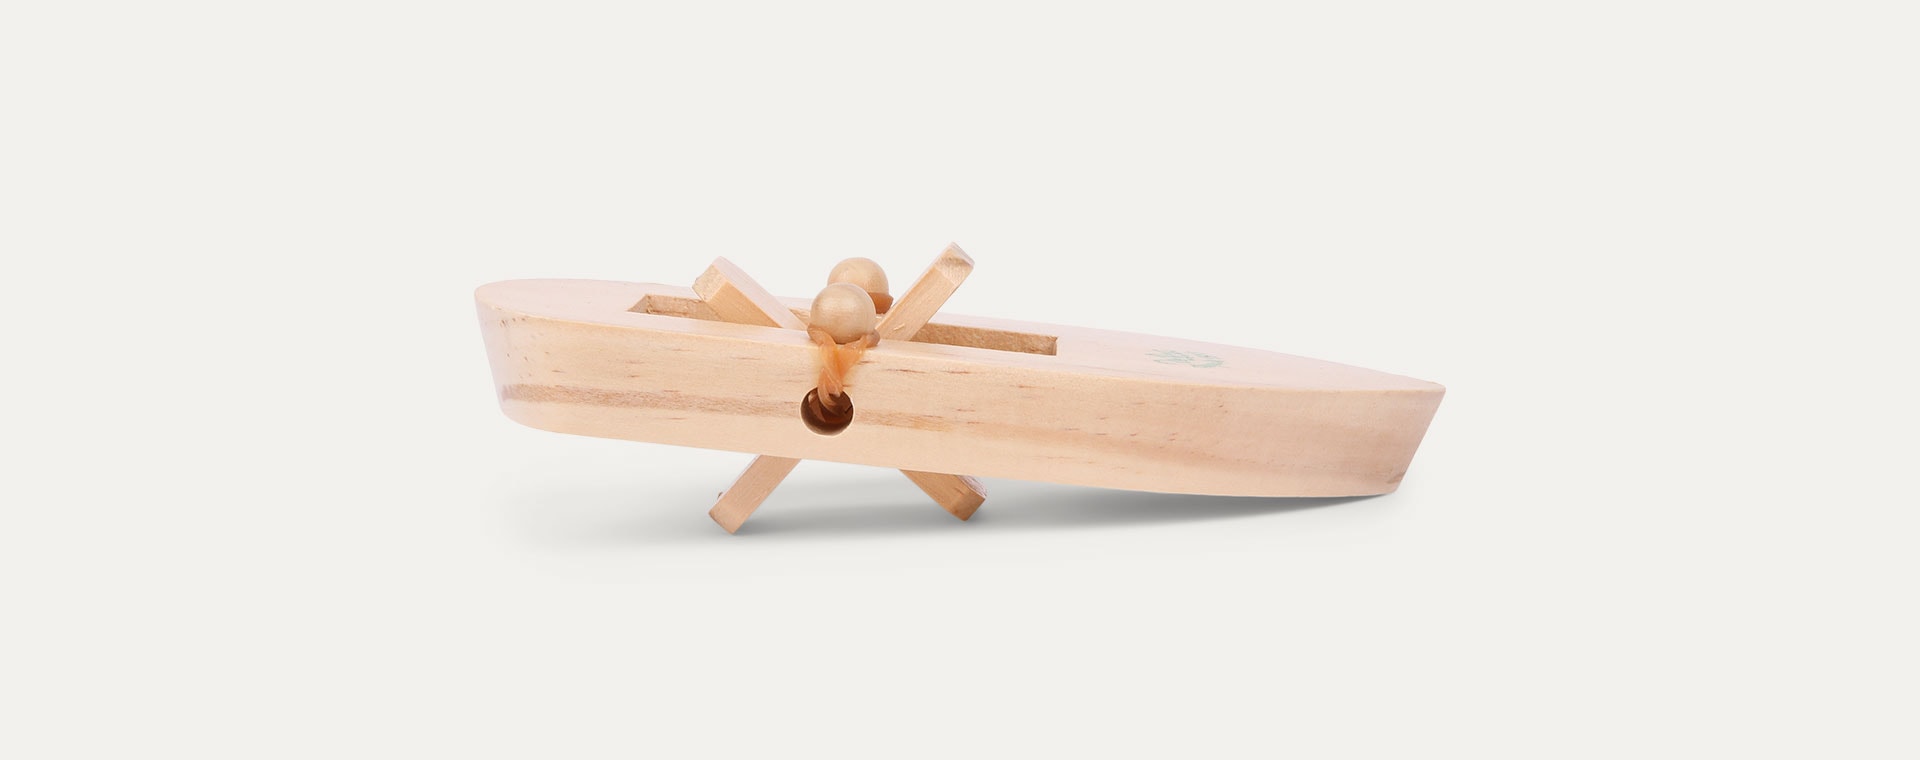 Multi Vilac Rubber Band Powered Boat